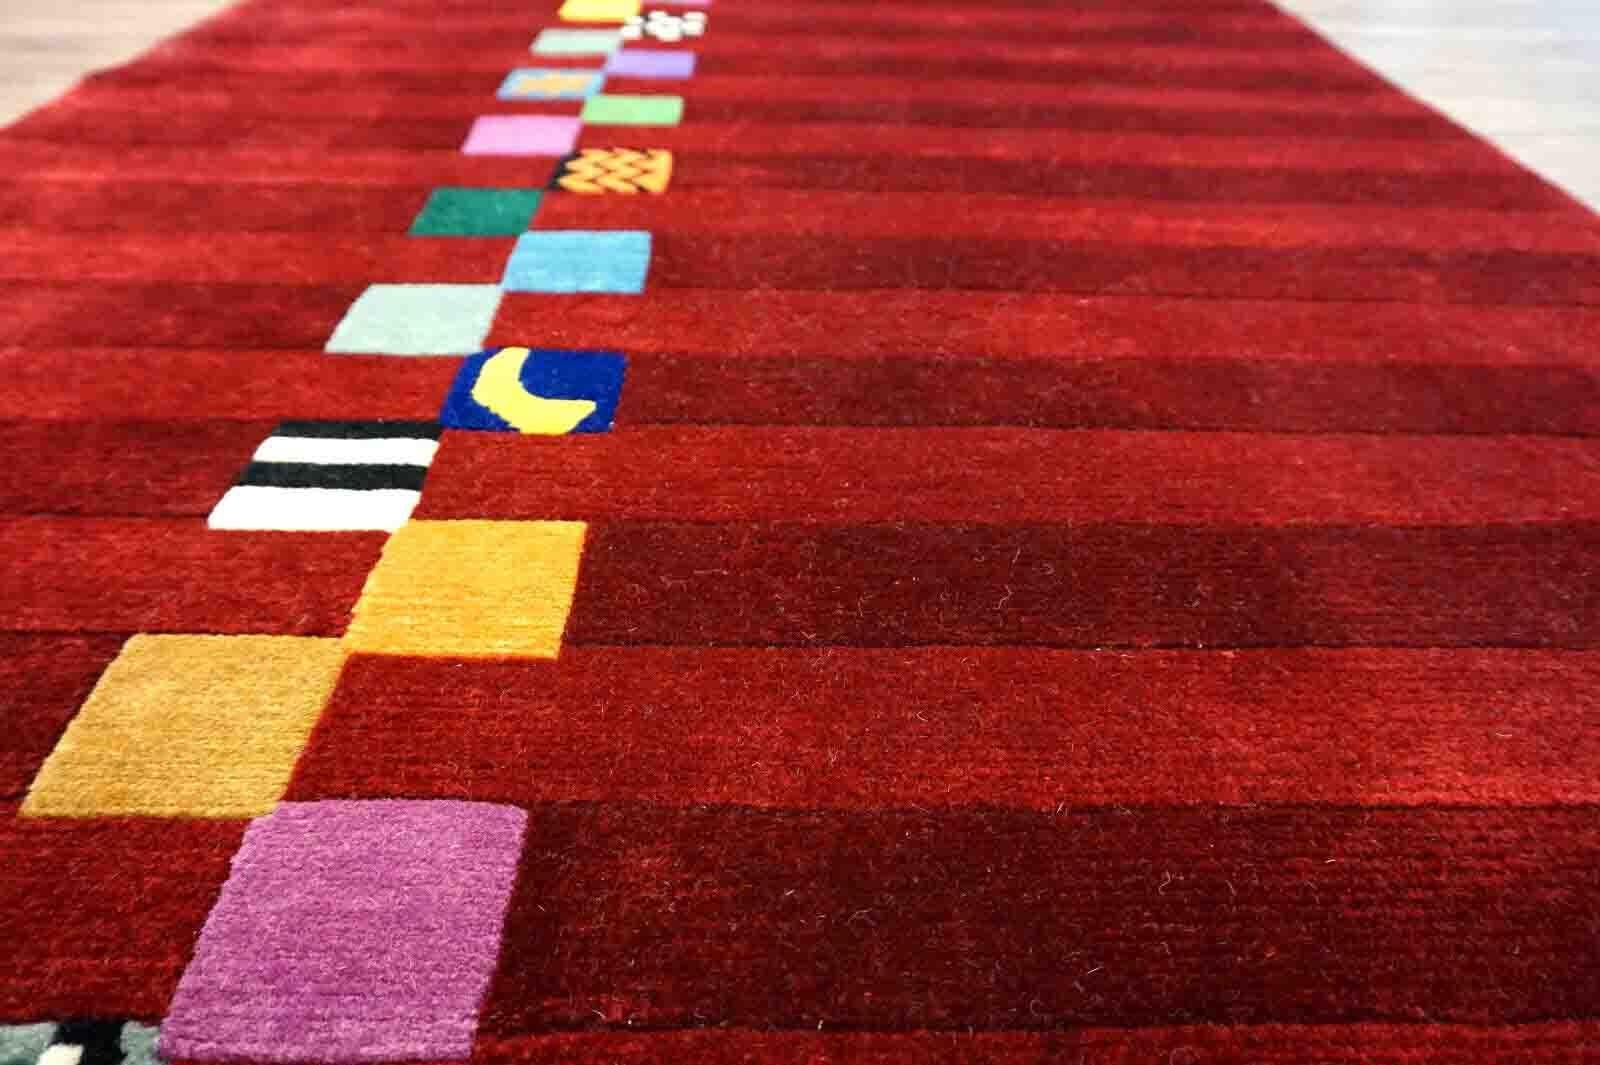 Handmade vintage Gabbeh rug in bright red color and colorful geometric design. The rug is from the end of 20th century in original good condition.

-condition: original good,

-circa: 1970s,

-size: 3.6' x 5.9' (112cm x 182cm),

-material: